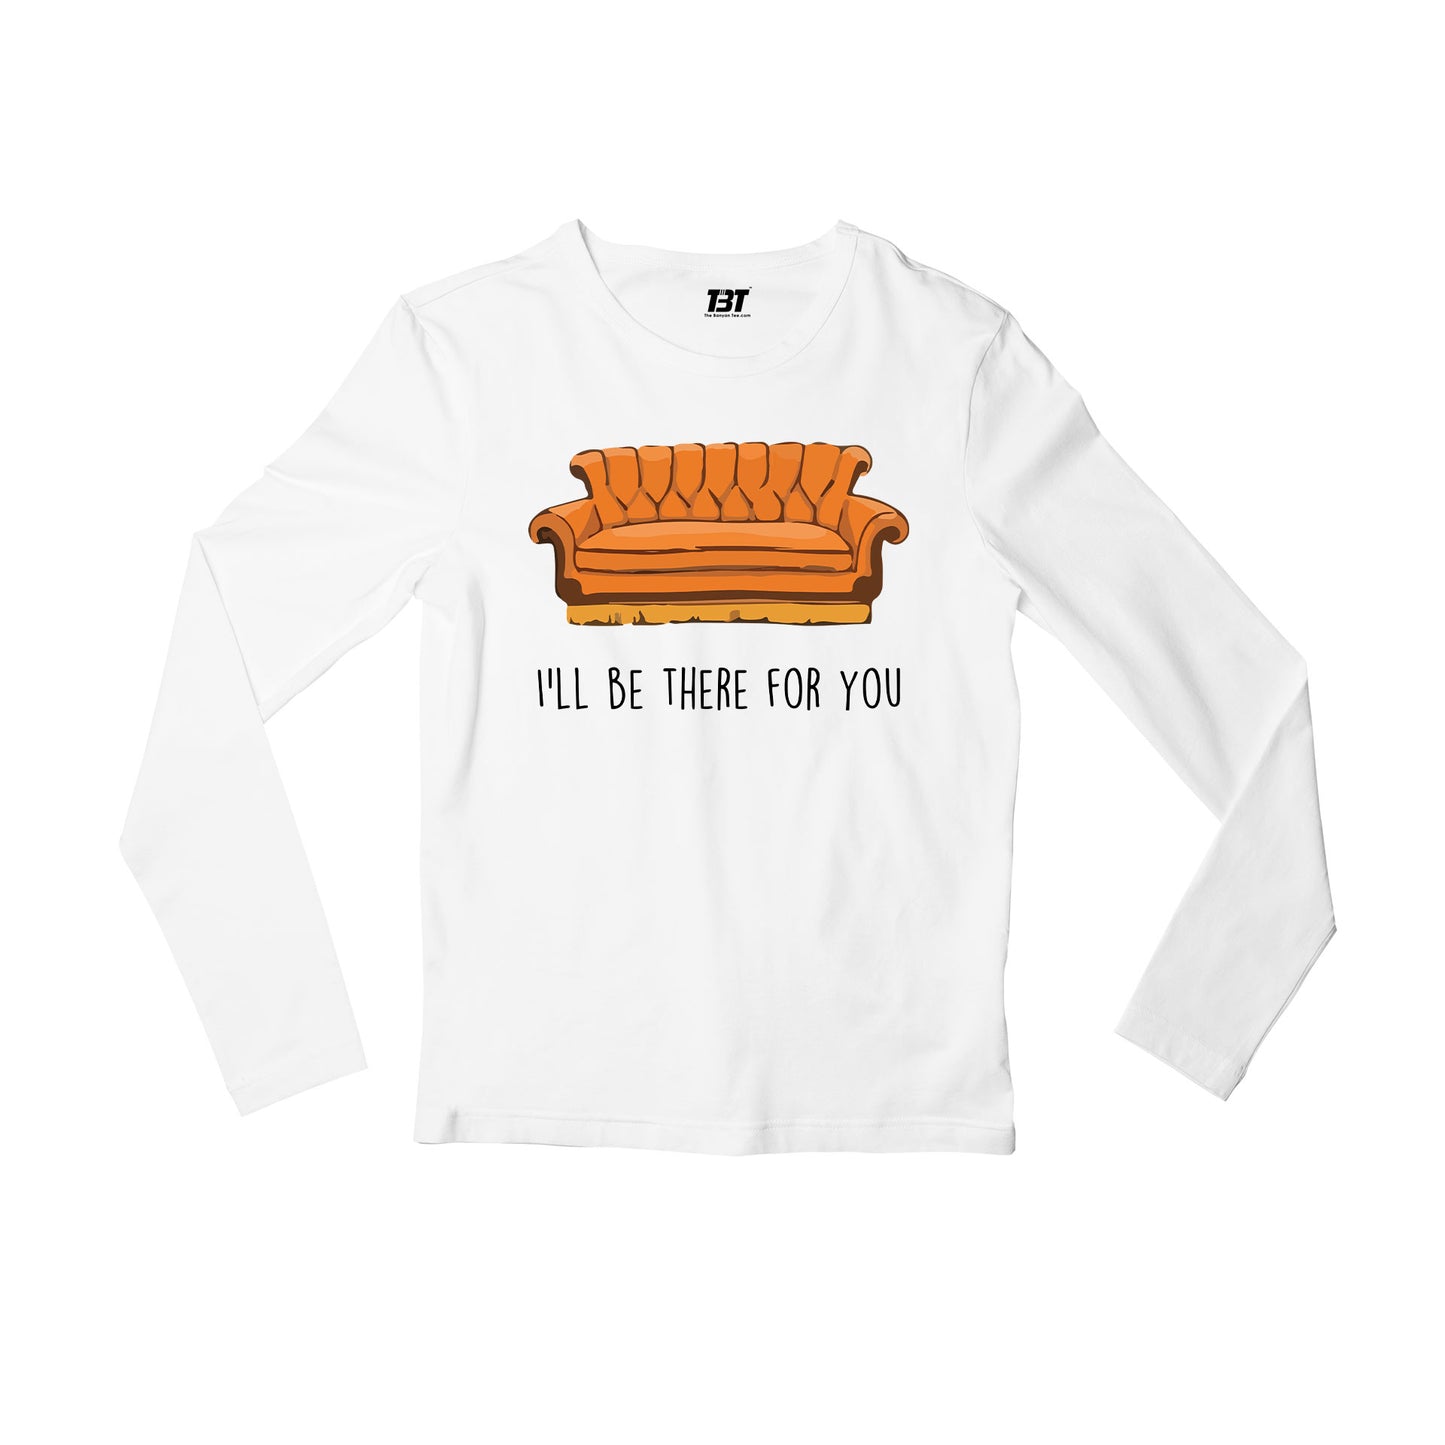 Friends Full Sleeves T-shirt - The Iconic Couch Full Sleeves T-shirt The Banyan Tee TBT